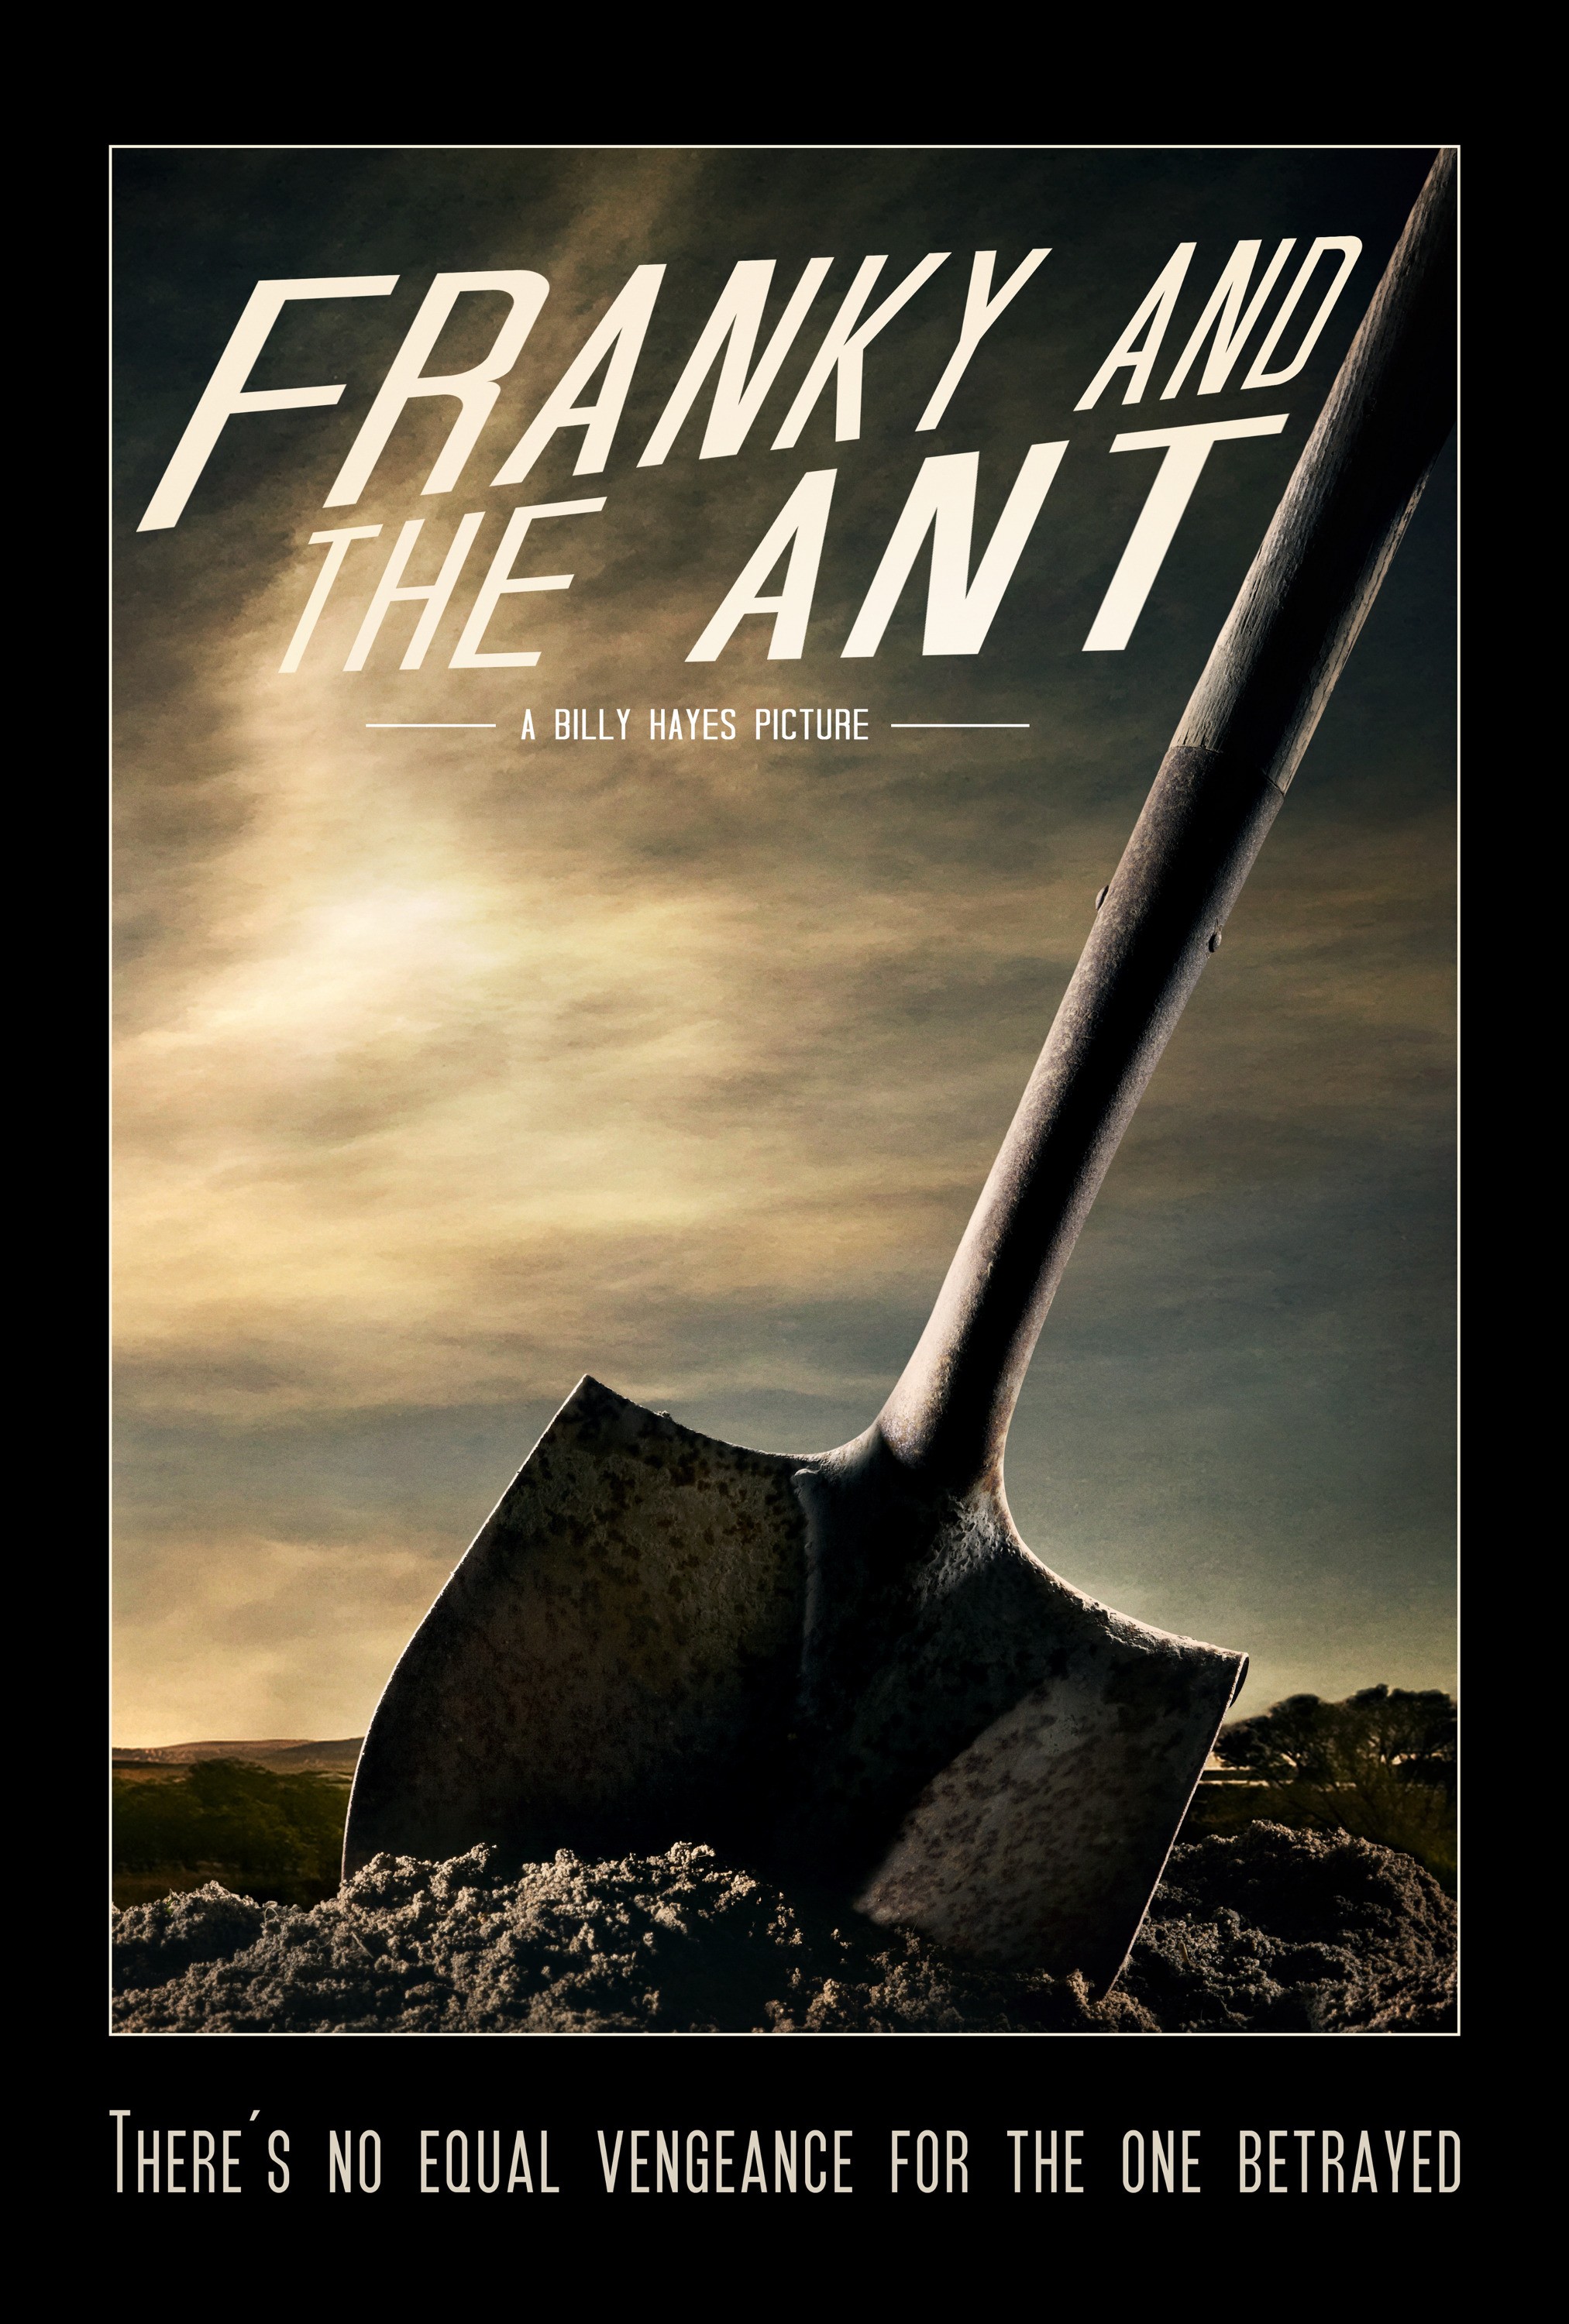 Mega Sized Movie Poster Image for Franky and the Ant